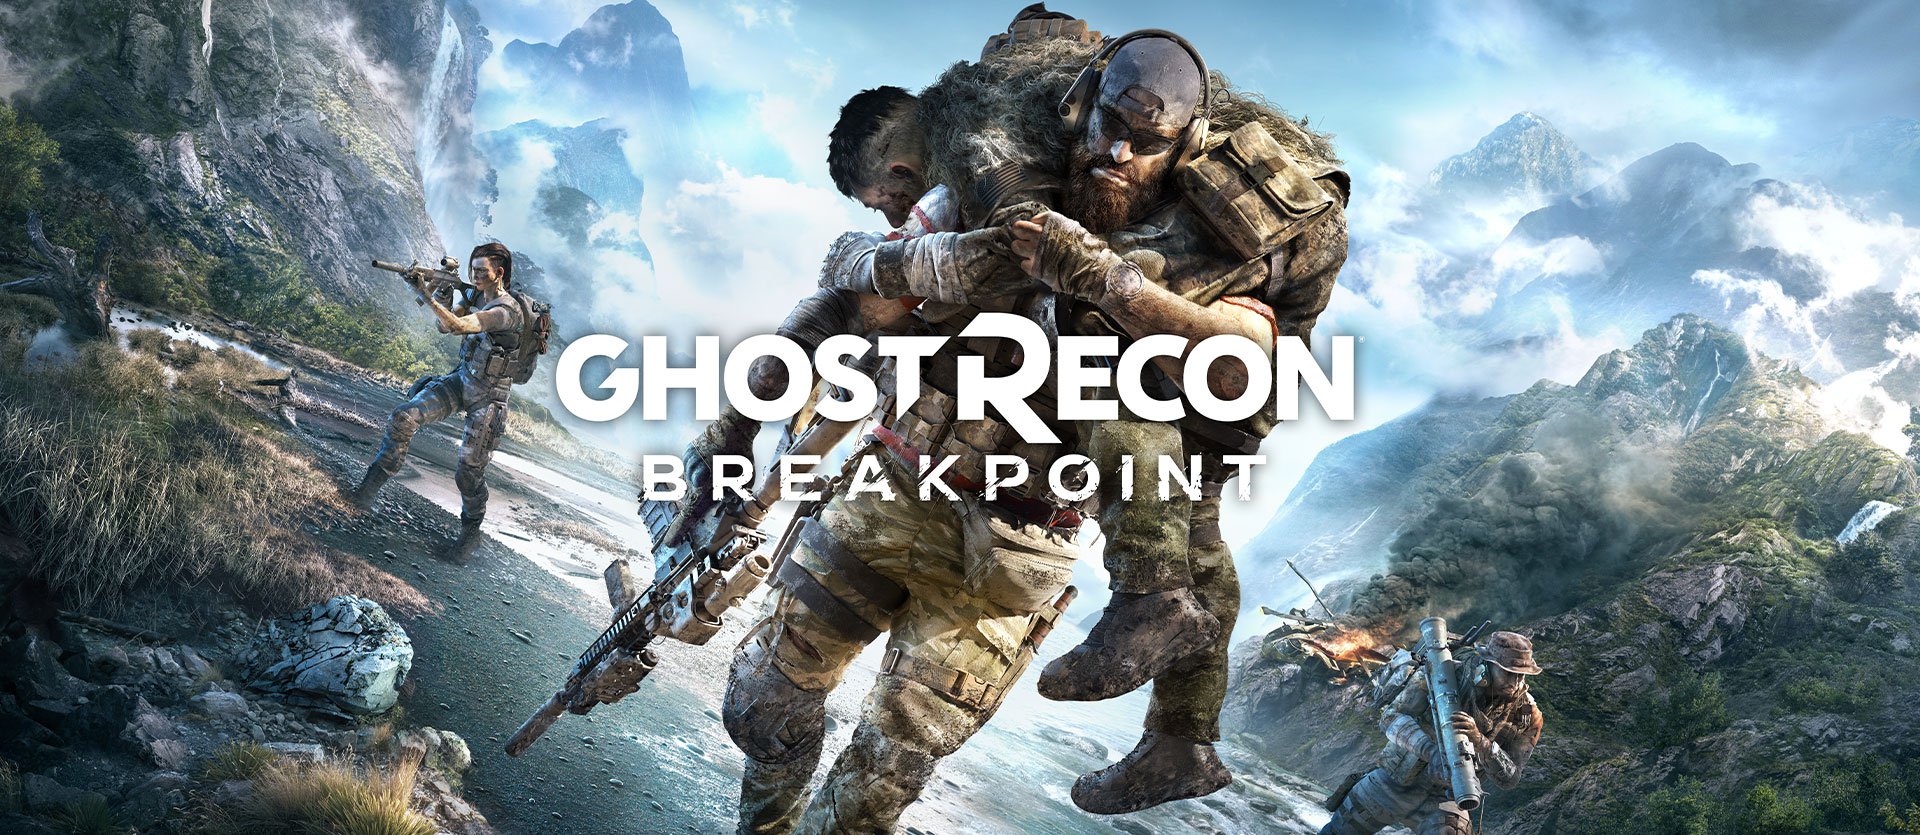 Tom Clancys Ghost Recon Breakpoint 1